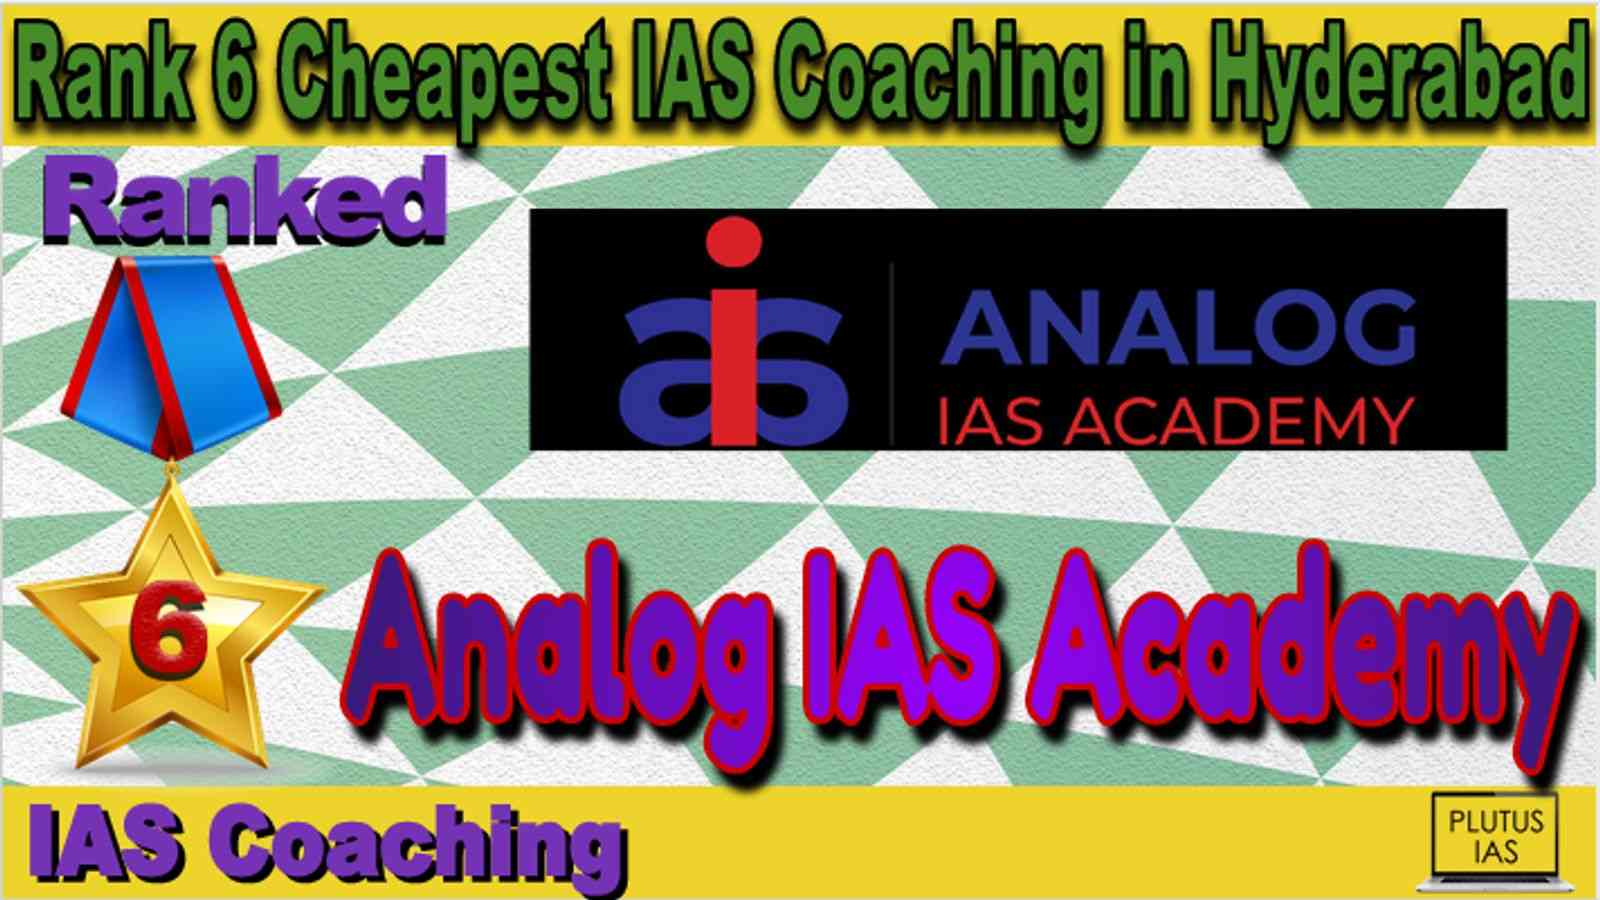 Rank 6 Cheapest IAS Coaching in Hyderabad